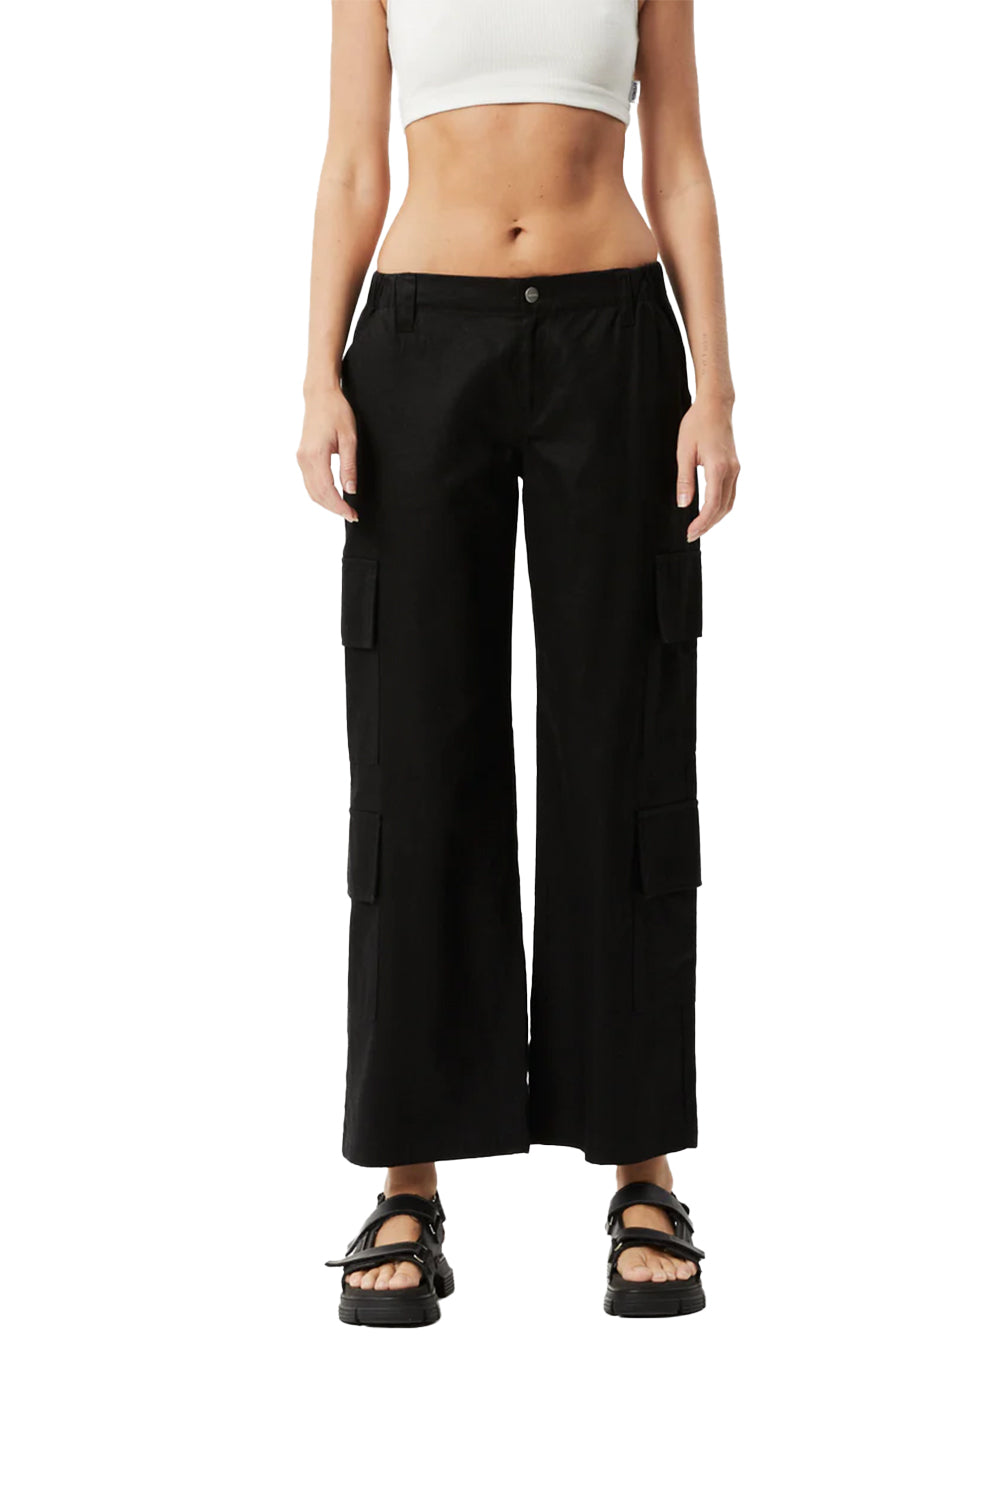 Afends Womens Midnight Cargo Pants